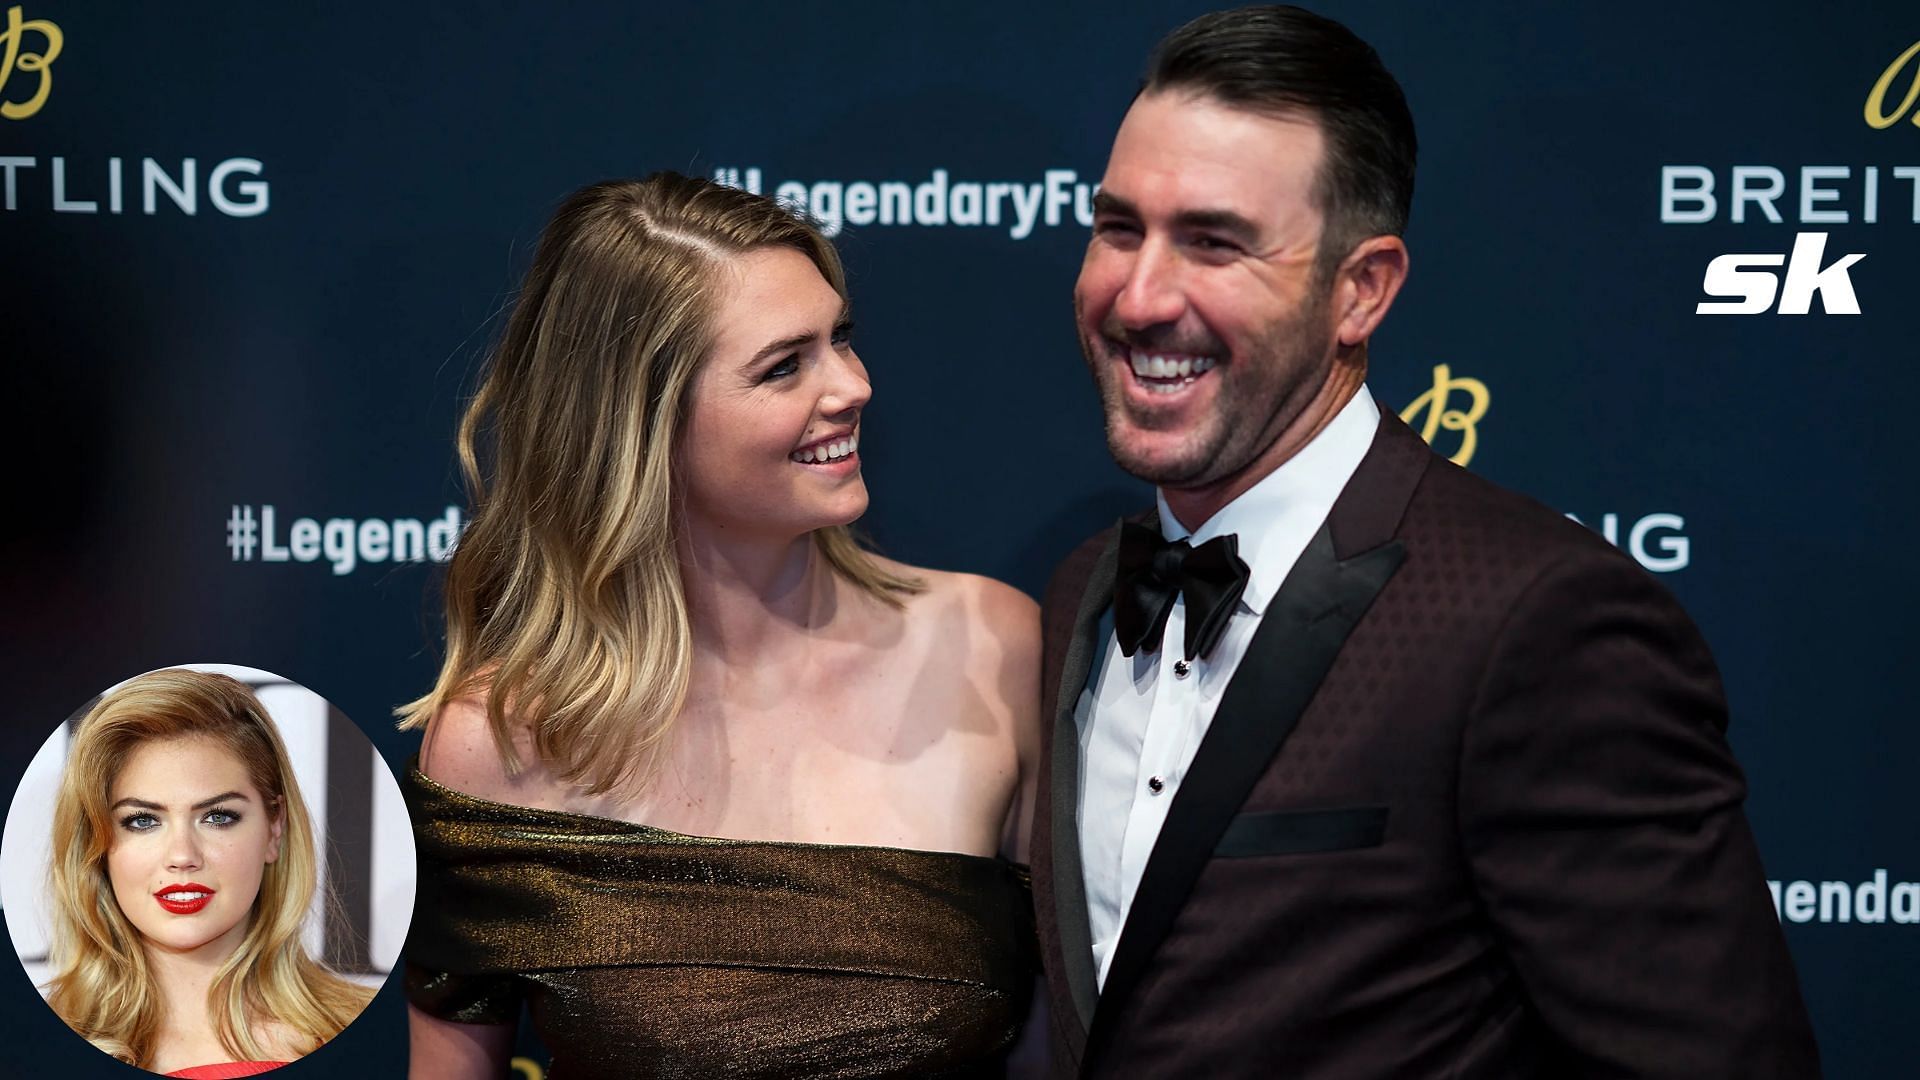 Houston Astros pitcher Justin Verlander with his wife Kate Upton; Kate Upton (inset)